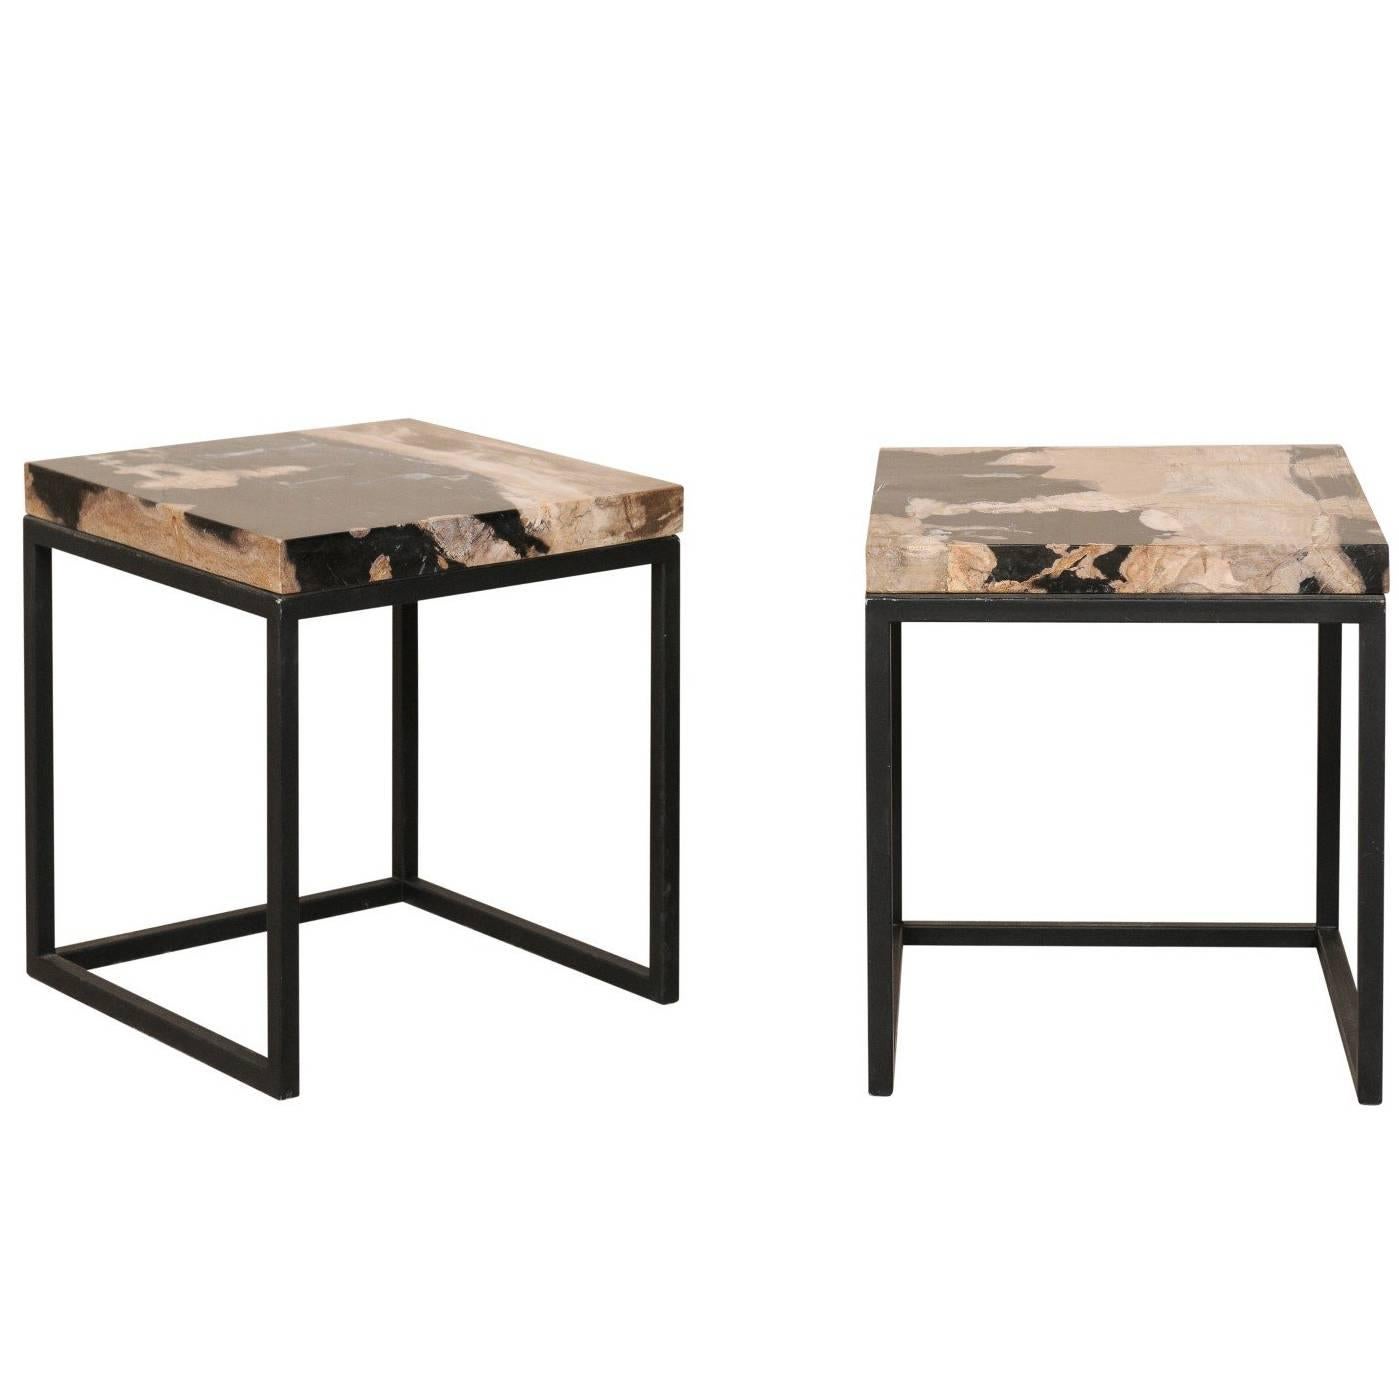 Pair of Modern Style Polished Petrified Wood Drink Tables with Iron Bases